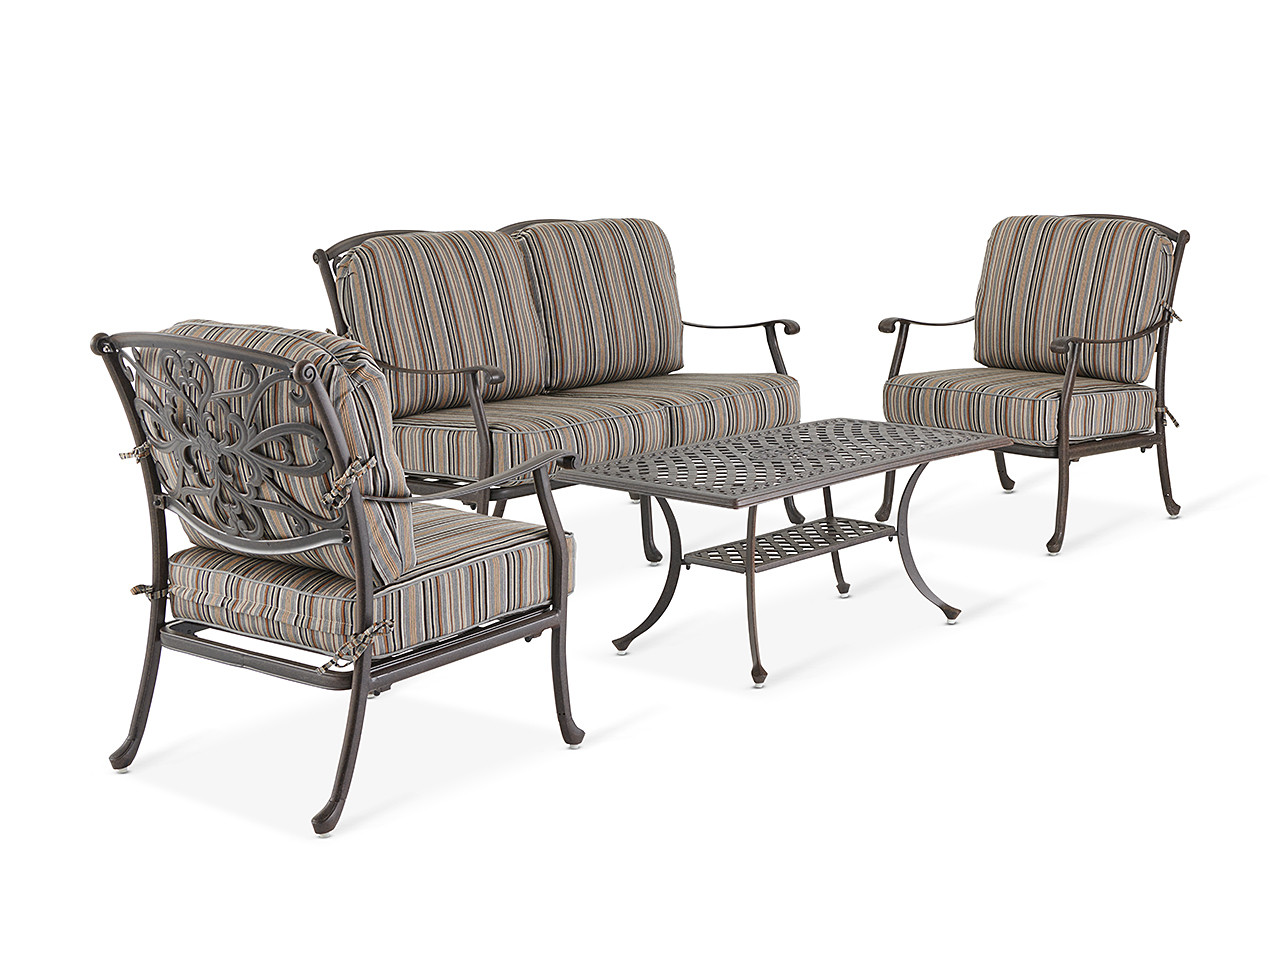 Carlisle Aged Bronze Cast Aluminum and Cultivate Stone Cushion 4 Pc. Loveseat Group with 45 x 24 in. Coffee Table